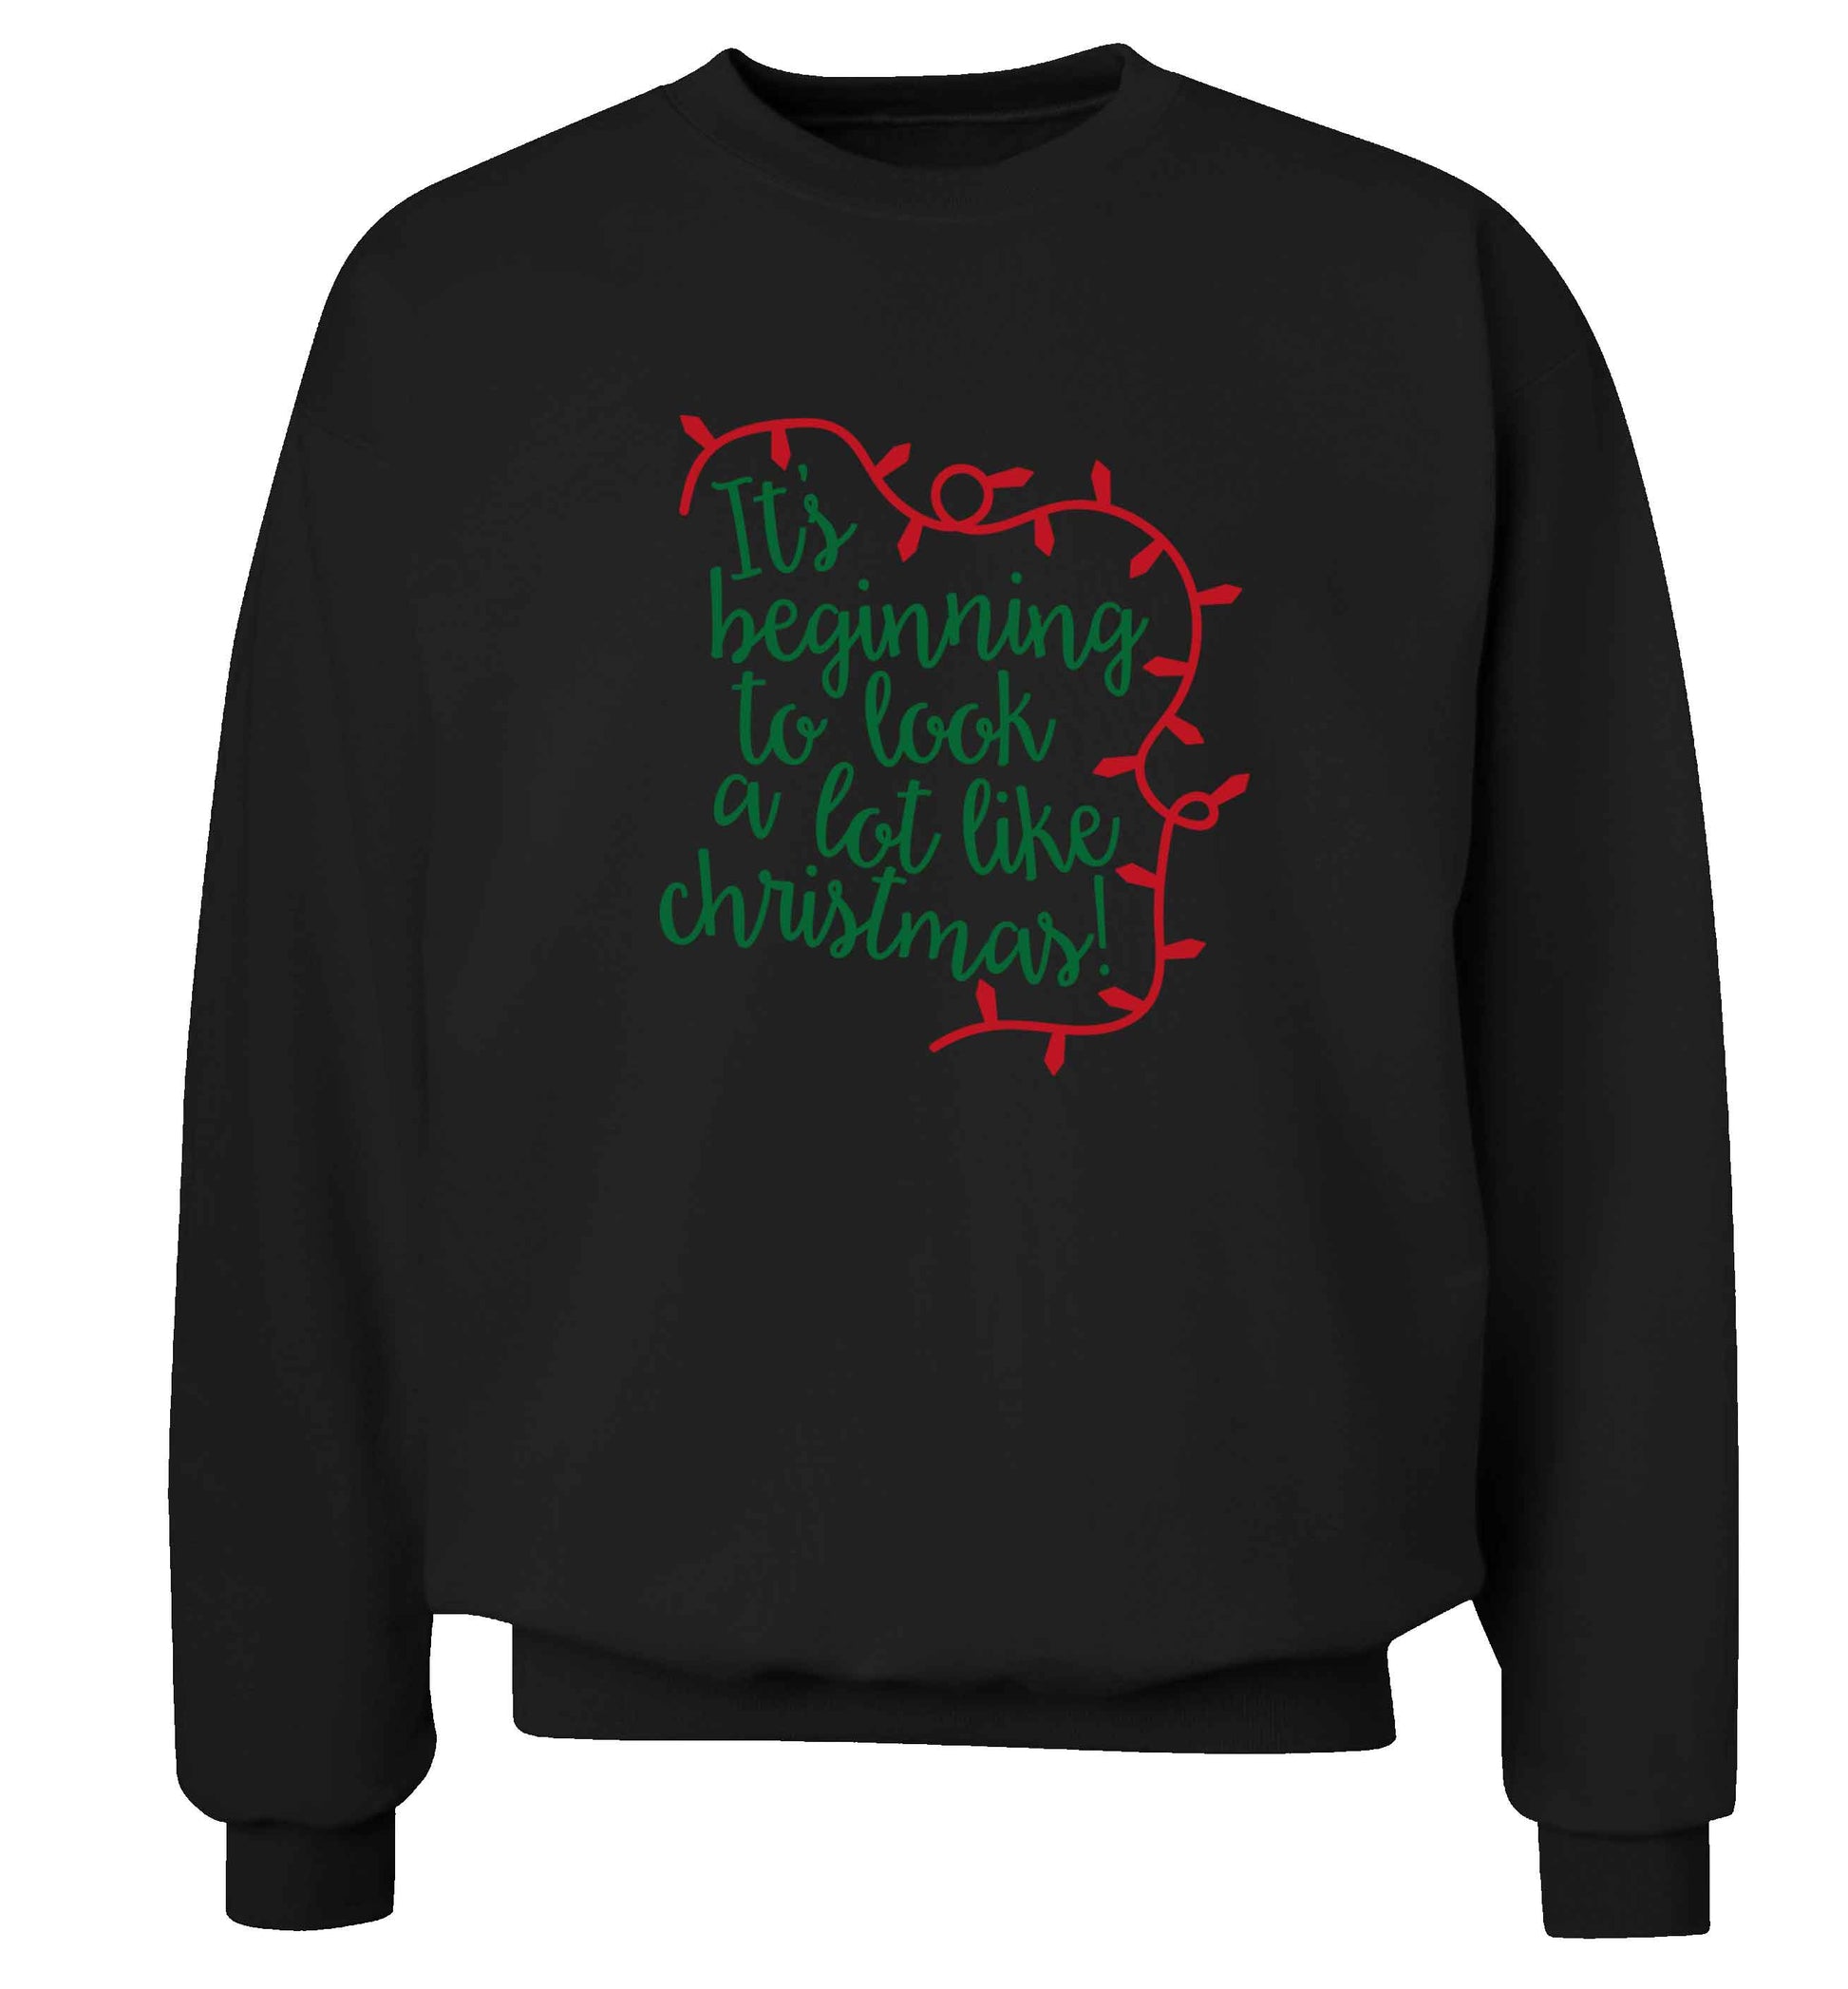 It's beginning to look a lot like Christmas adult's unisex black sweater 2XL